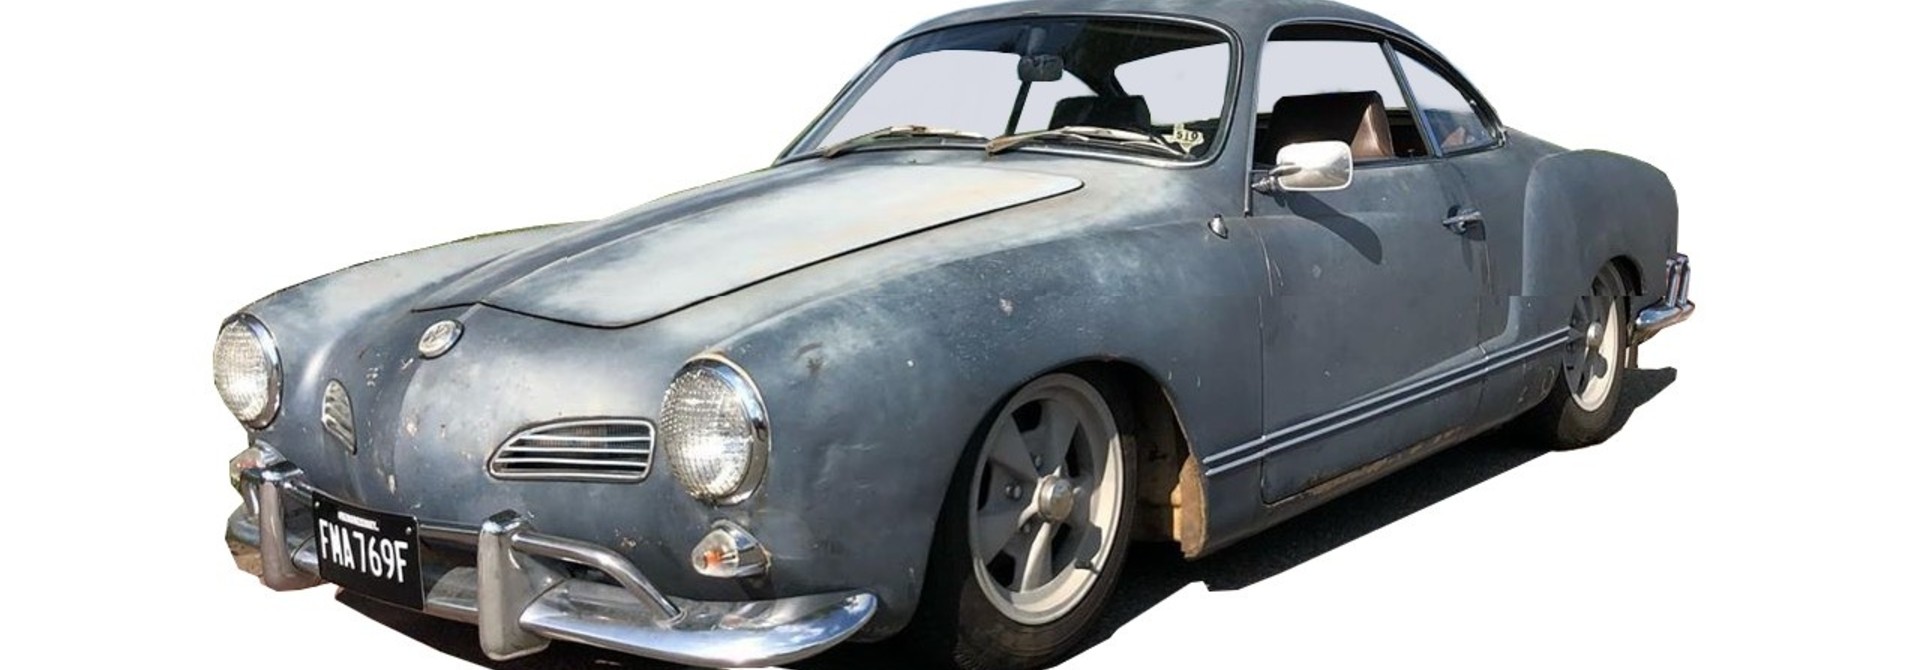 Sound insulation on a Volkswagen Karmann Ghia coupe from 1968